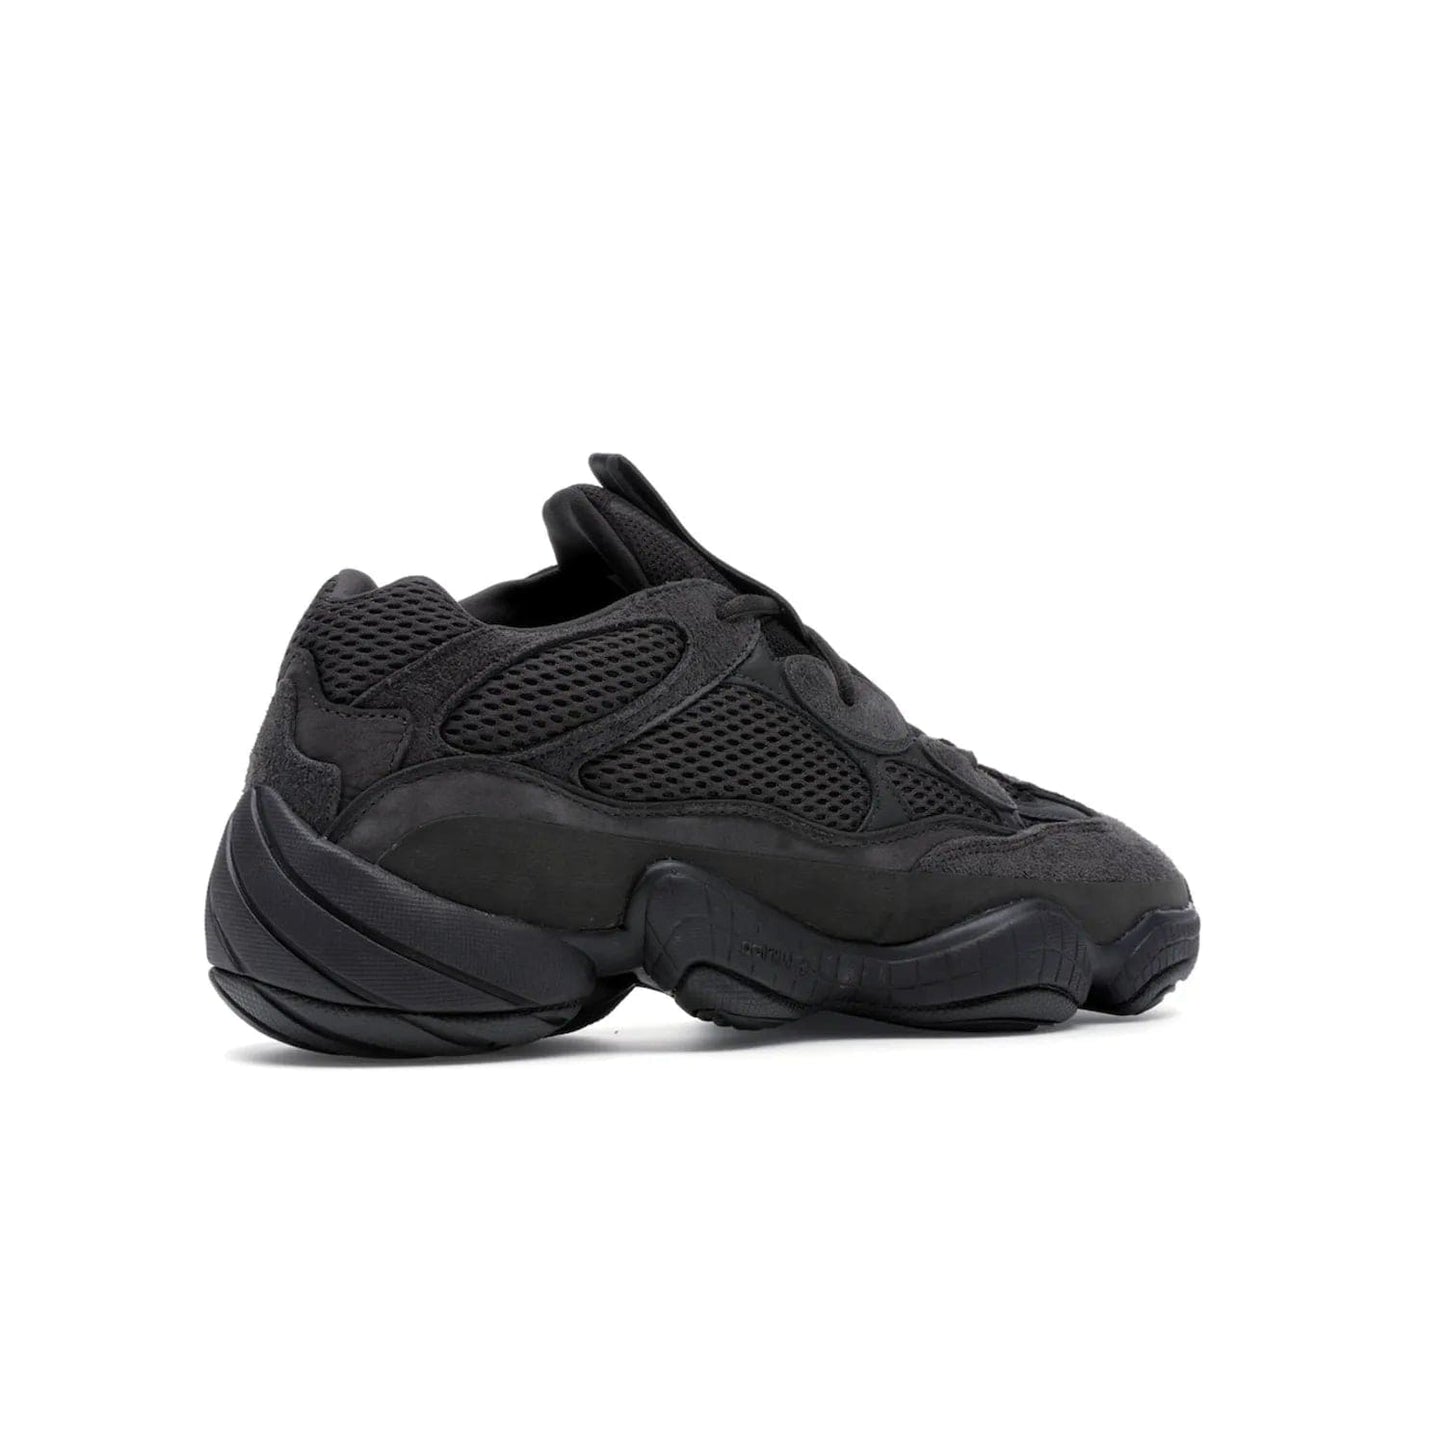 adidas Yeezy 500 Utility Black - Image 34 - Only at www.BallersClubKickz.com - Iconic adidas Yeezy 500 Utility Black in All-Black colorway. Durable black mesh and suede upper with adiPRENE® sole delivers comfort and support. Be unstoppable with the Yeezy 500 Utility Black. Released July 2018.